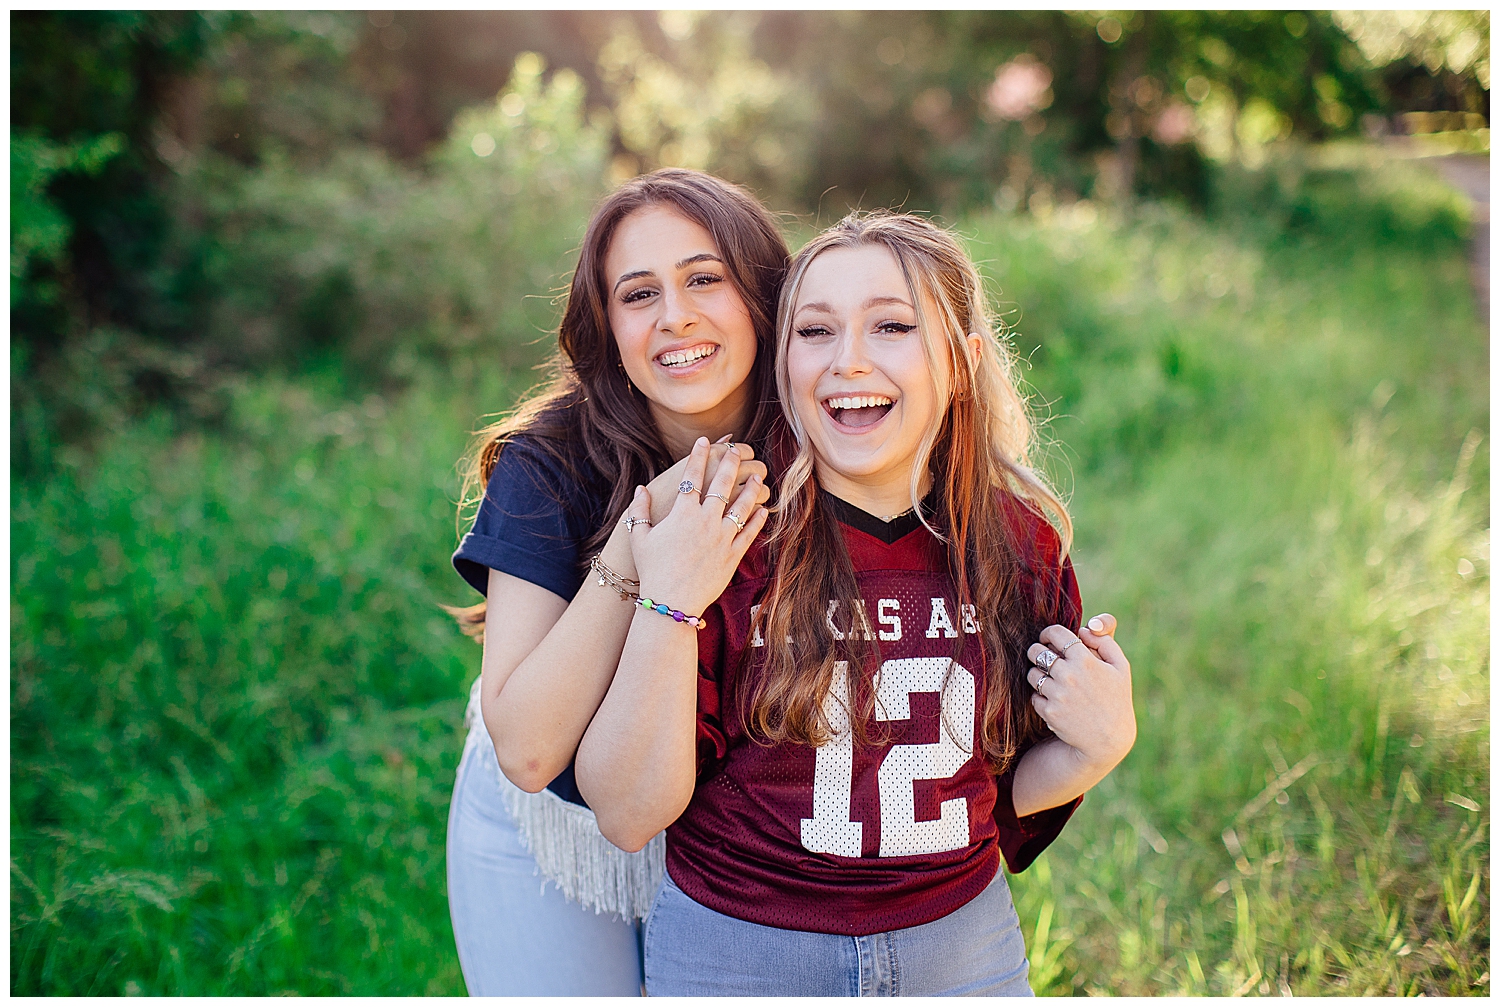 best friends holding hands and laughing for college shirt senior photos